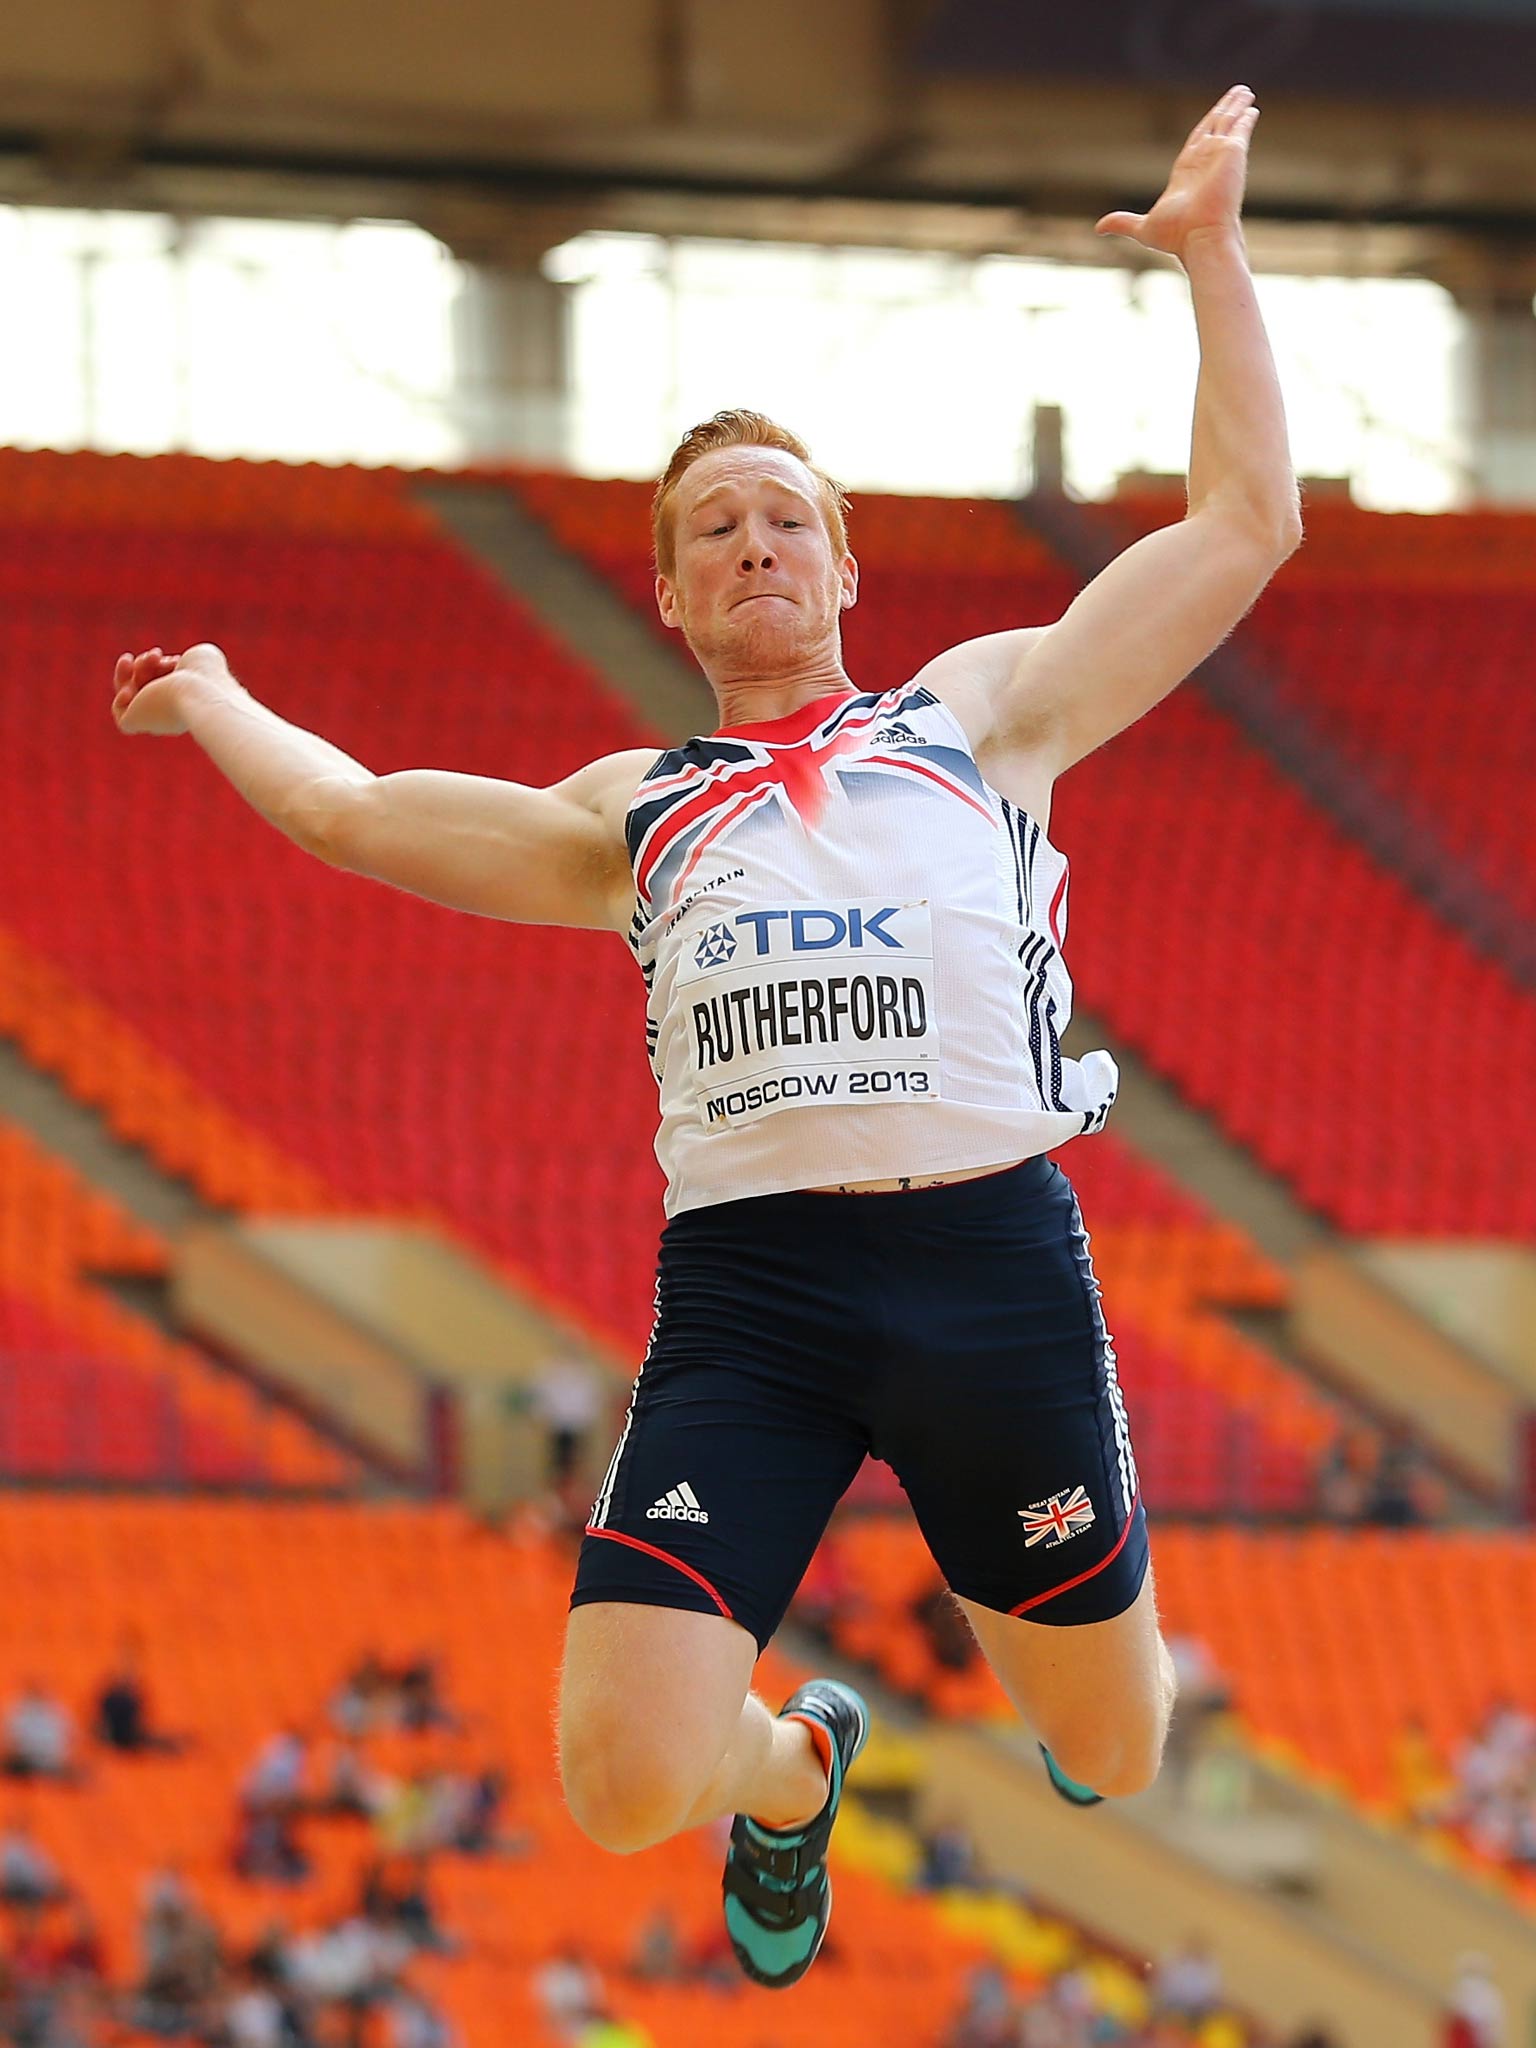 Greg Rutherford in action in Moscow